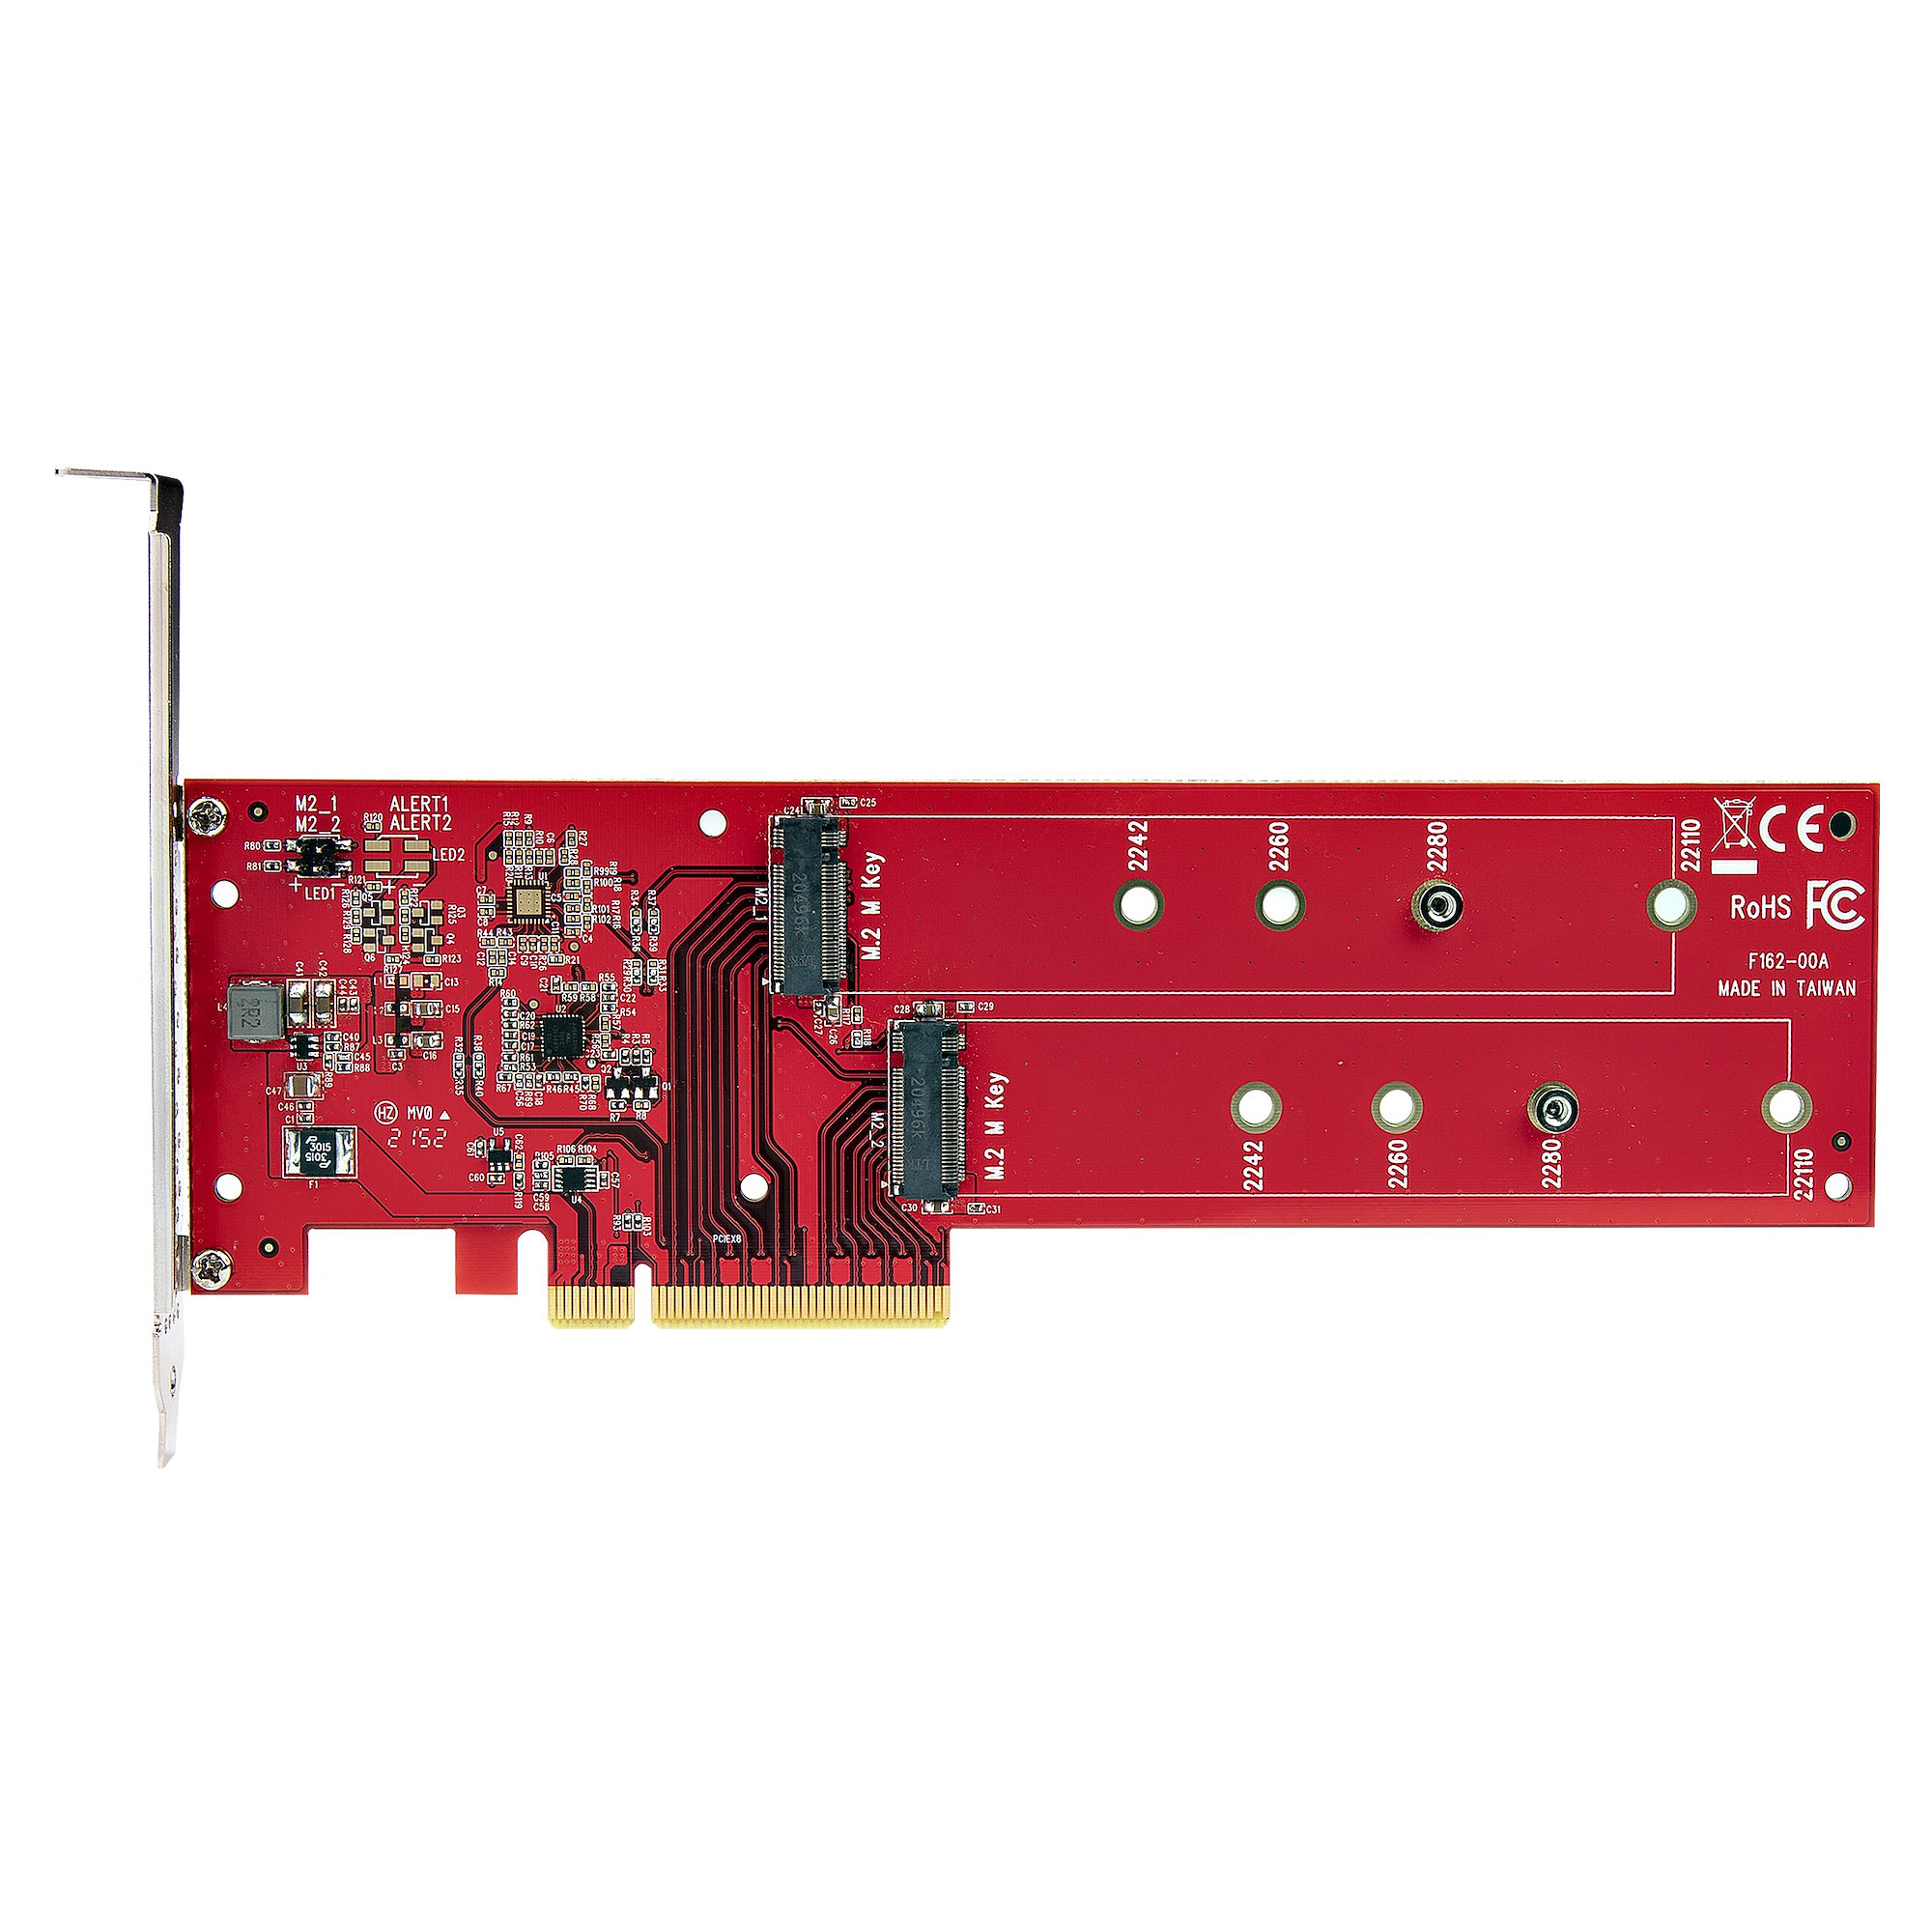 Dual M.2 PCIe SSD Adapter, NVMe / AHCI - Drive Adapters and Drive 